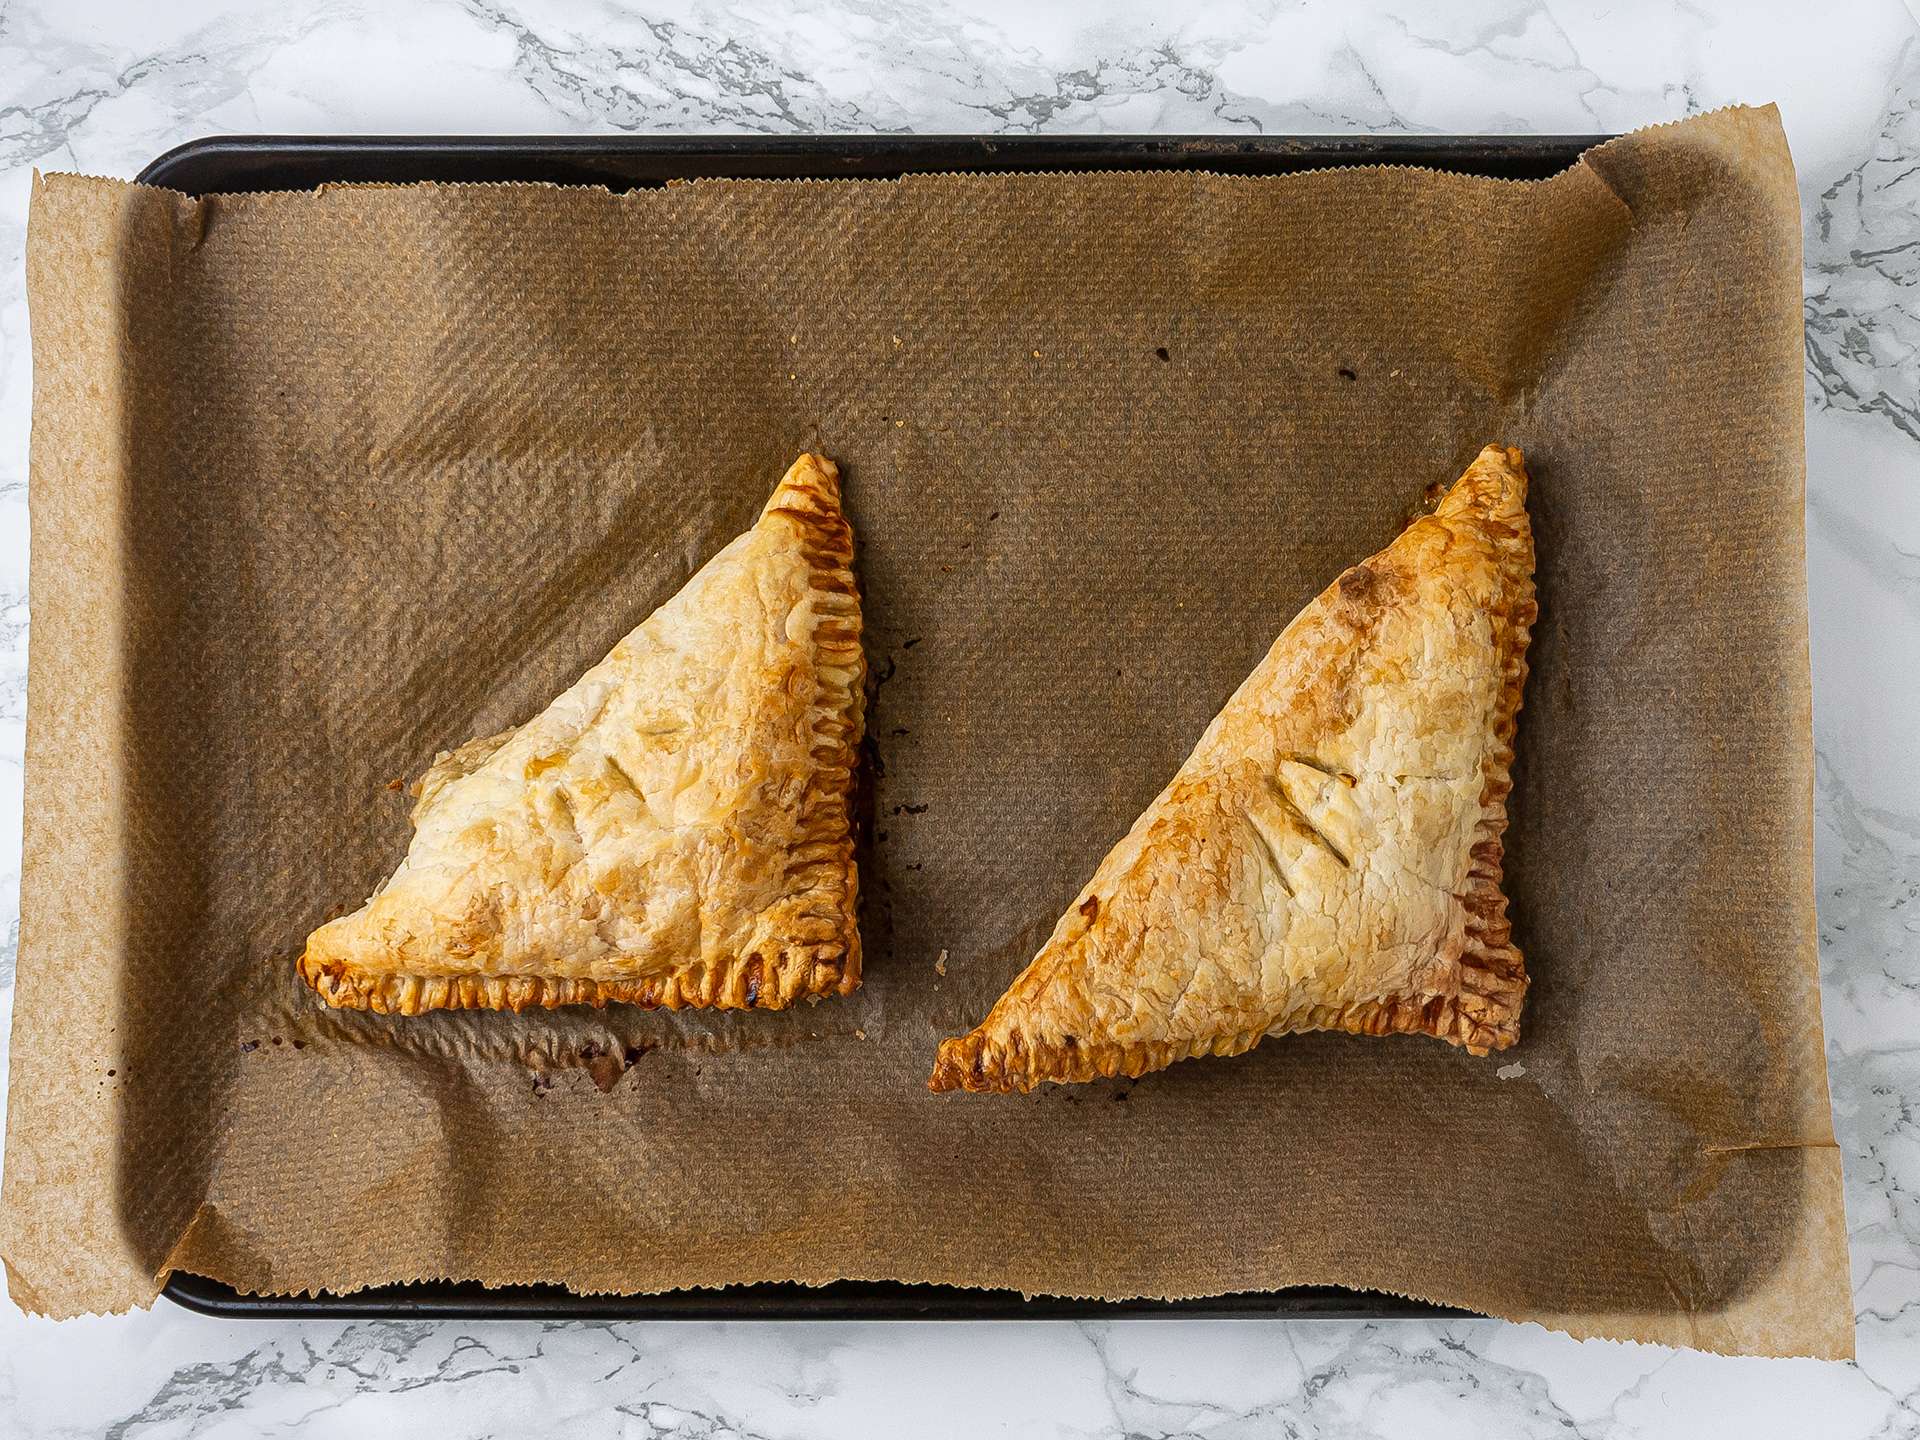 Crispy gluten-free pear turnover with dates pastries baked in the oven